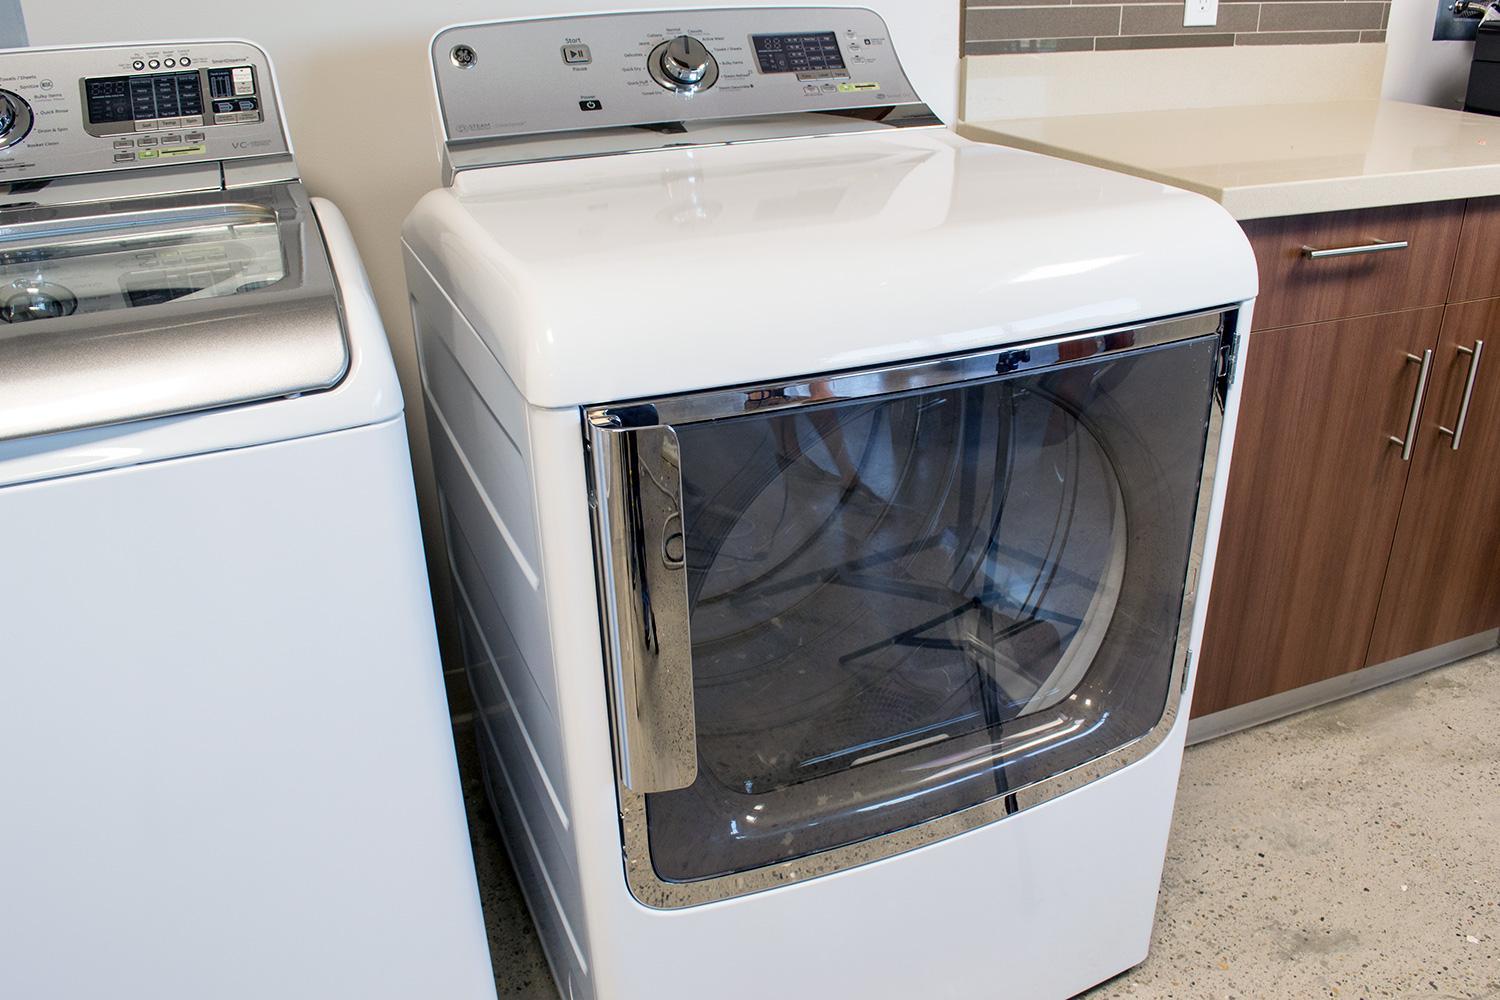 How To Fix The Error Code DL For GE Dryer